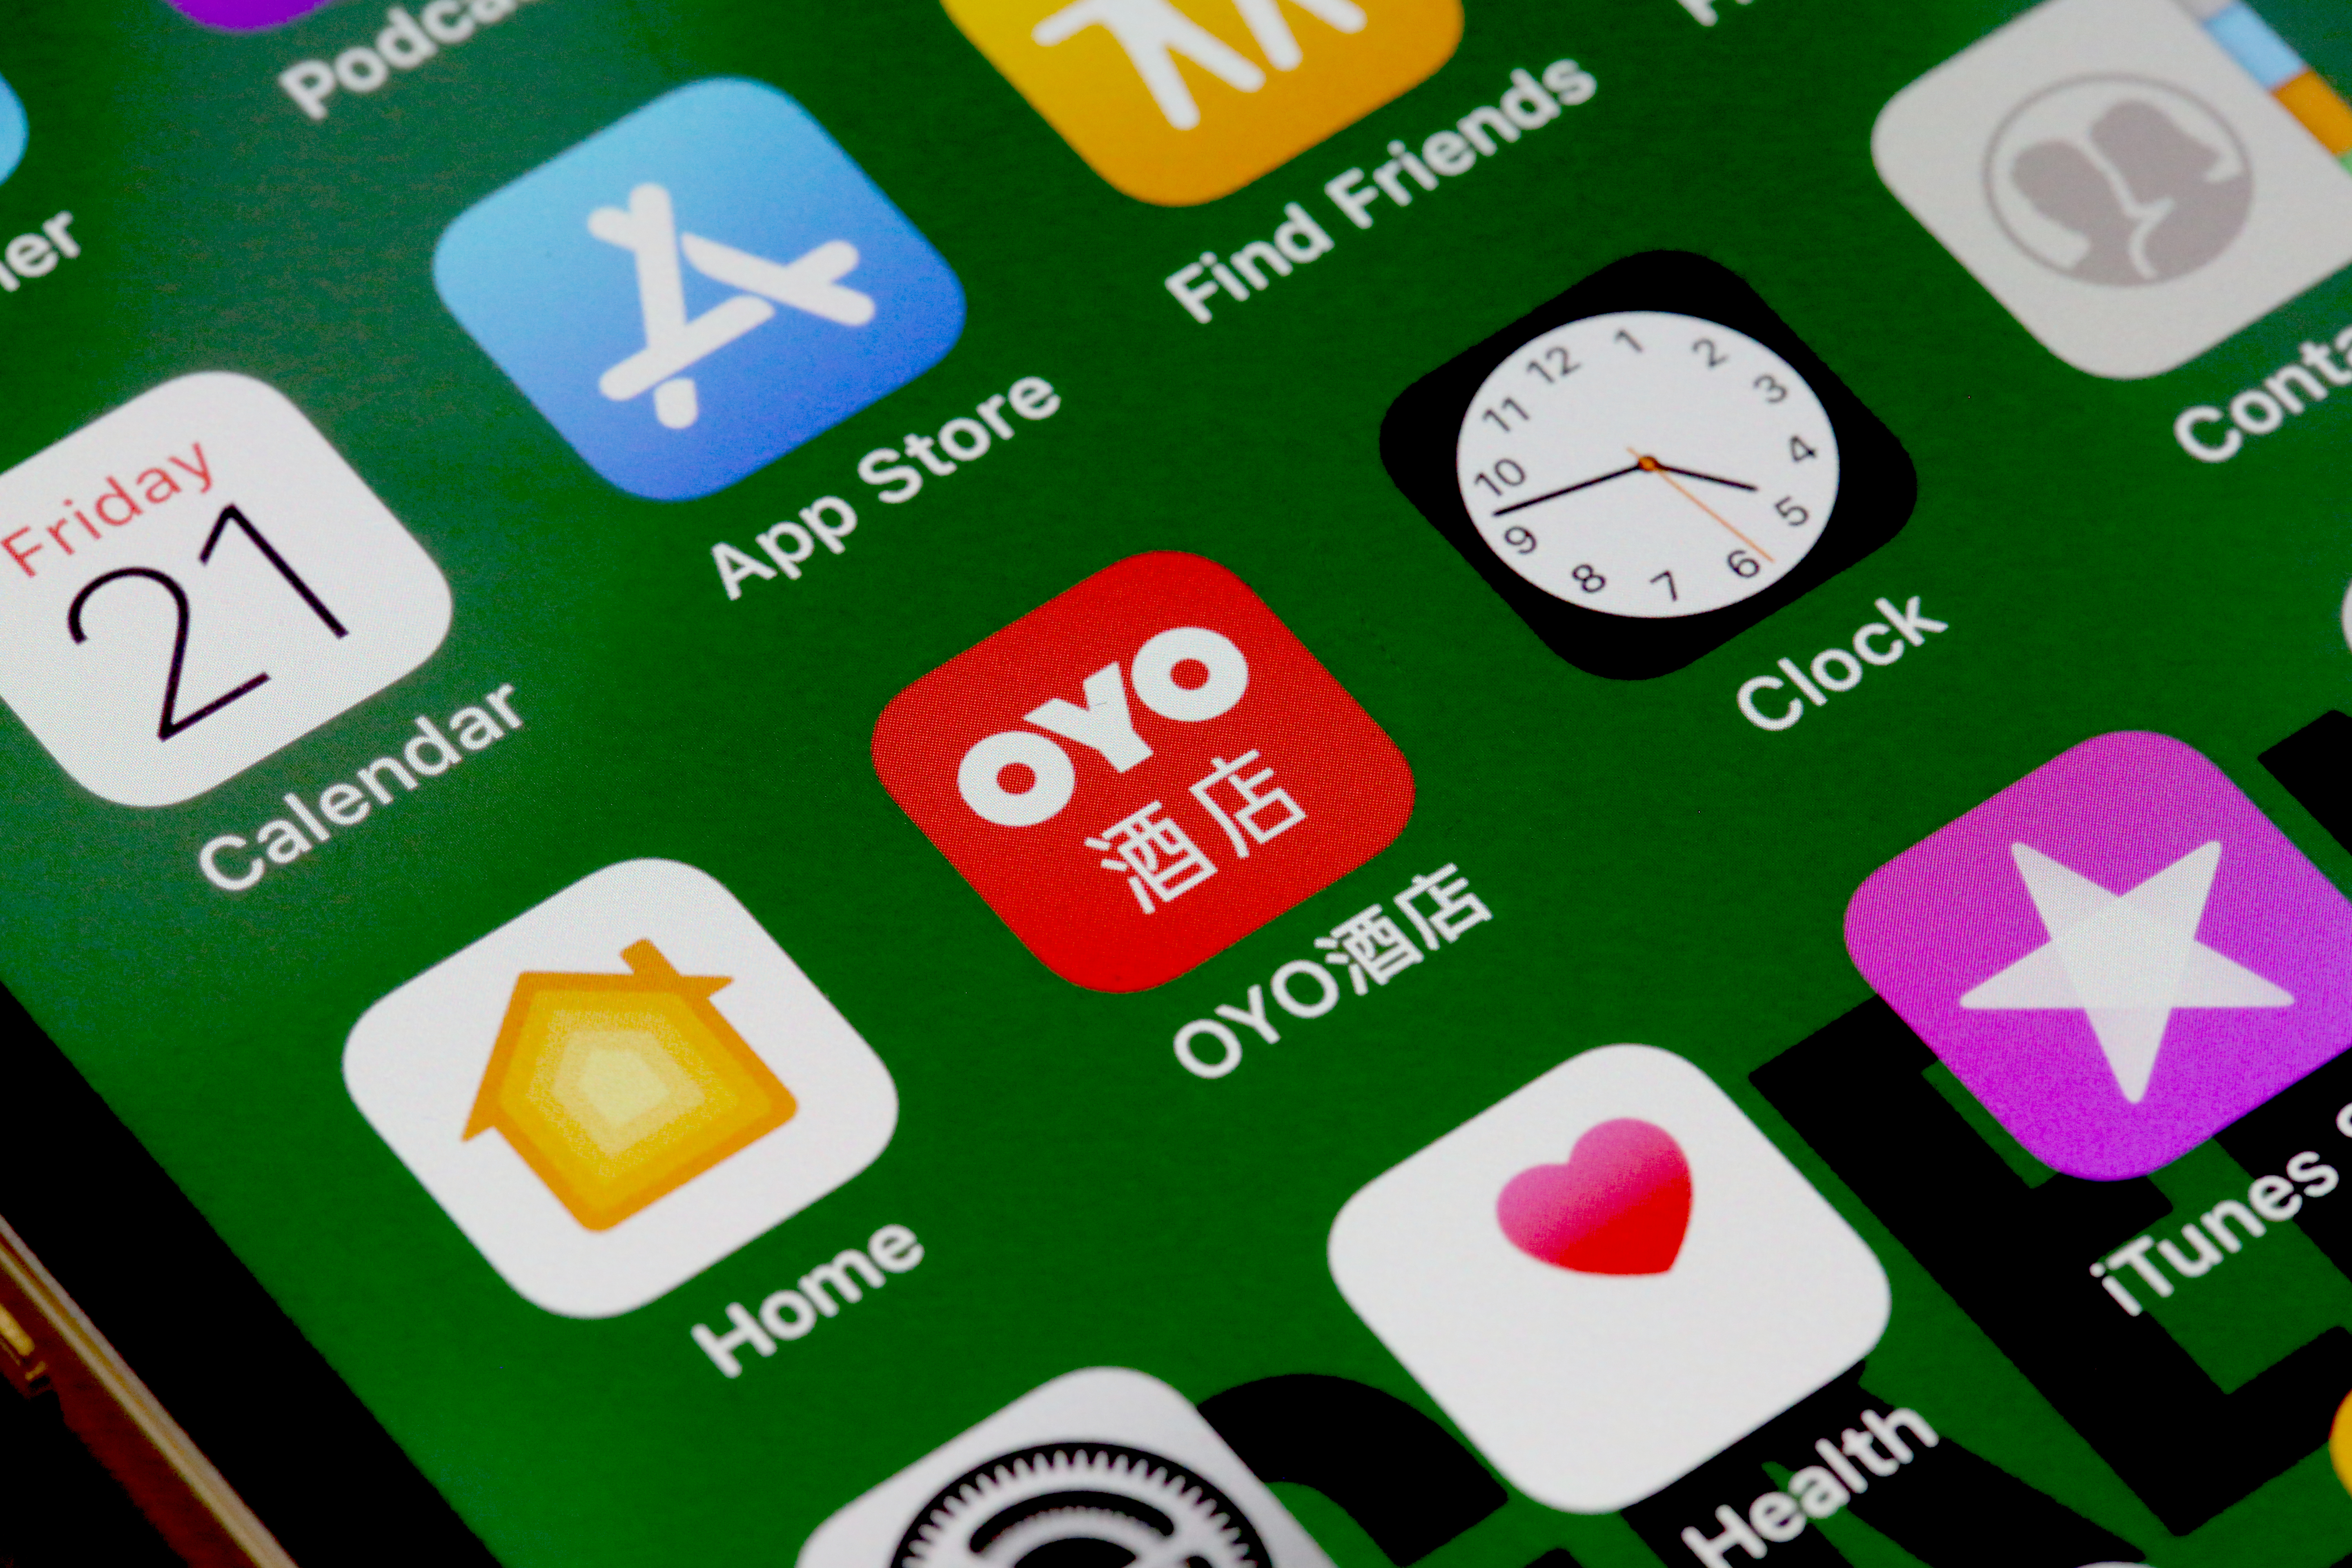 After strategy shift, OYO China wants to bind hotel owners with a revenue guarantee